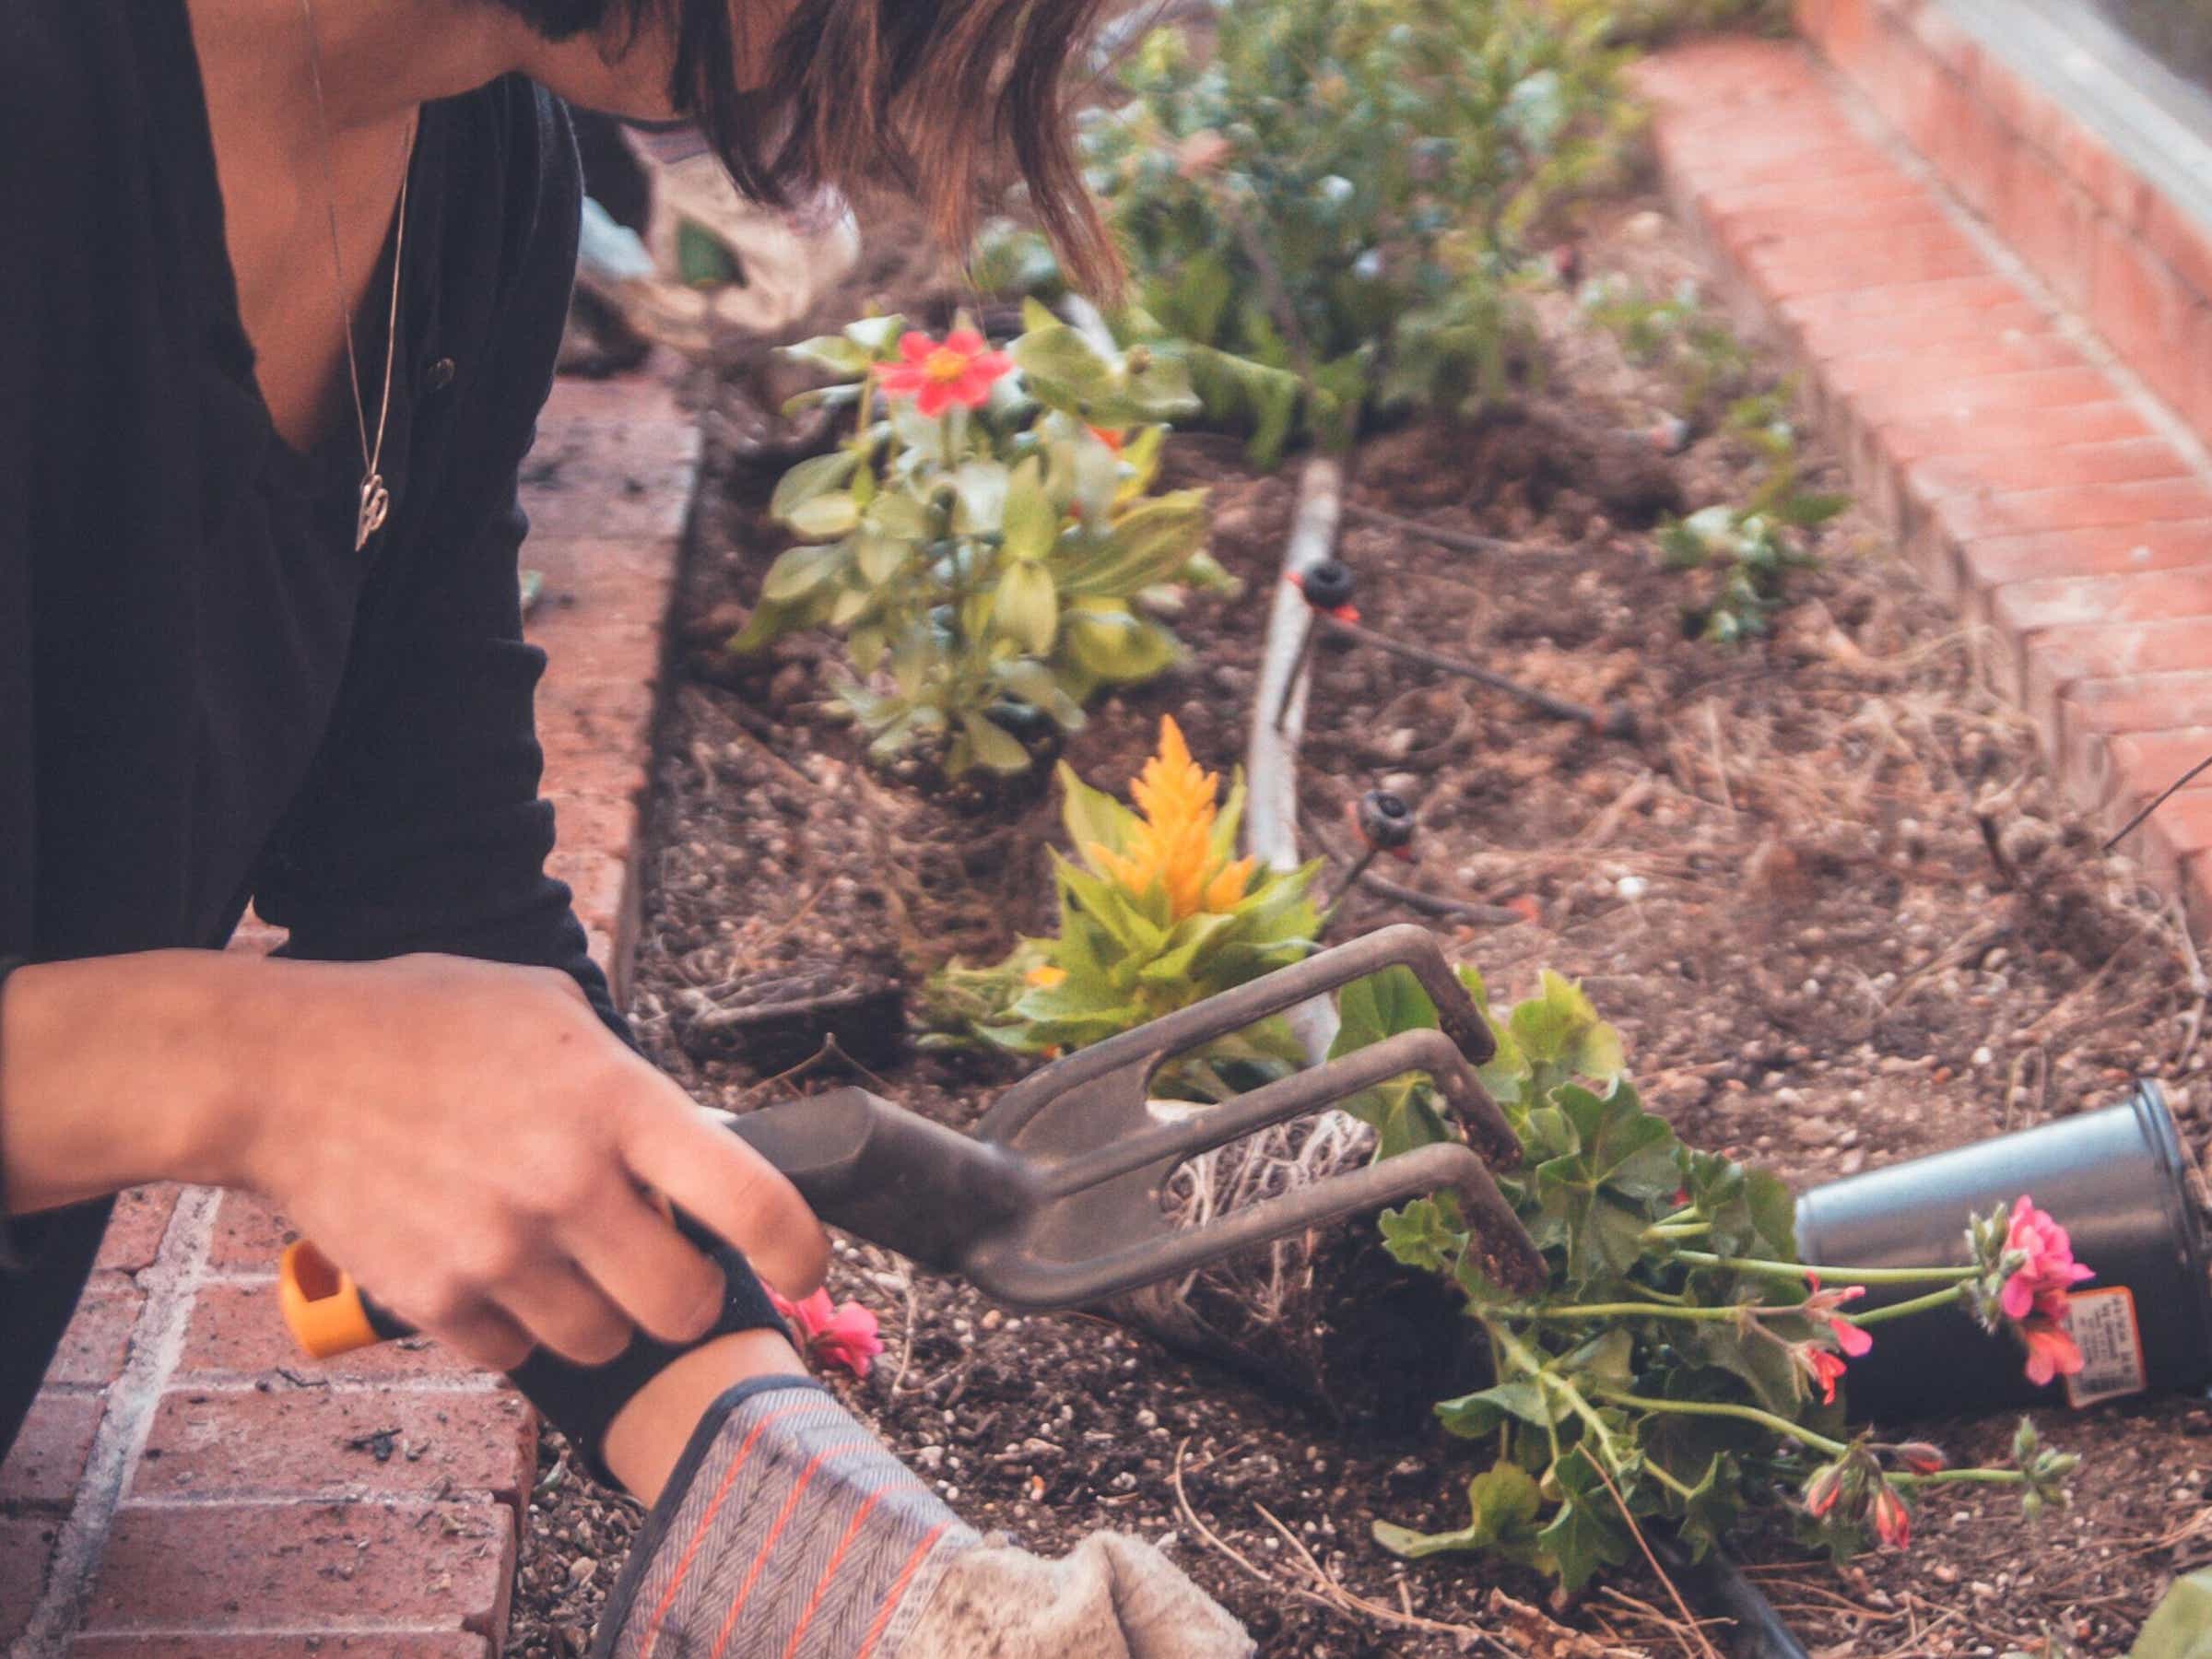 Company insurance is intended to safeguard the financial assets of a business owner and is a critical investment for a general gardening business.